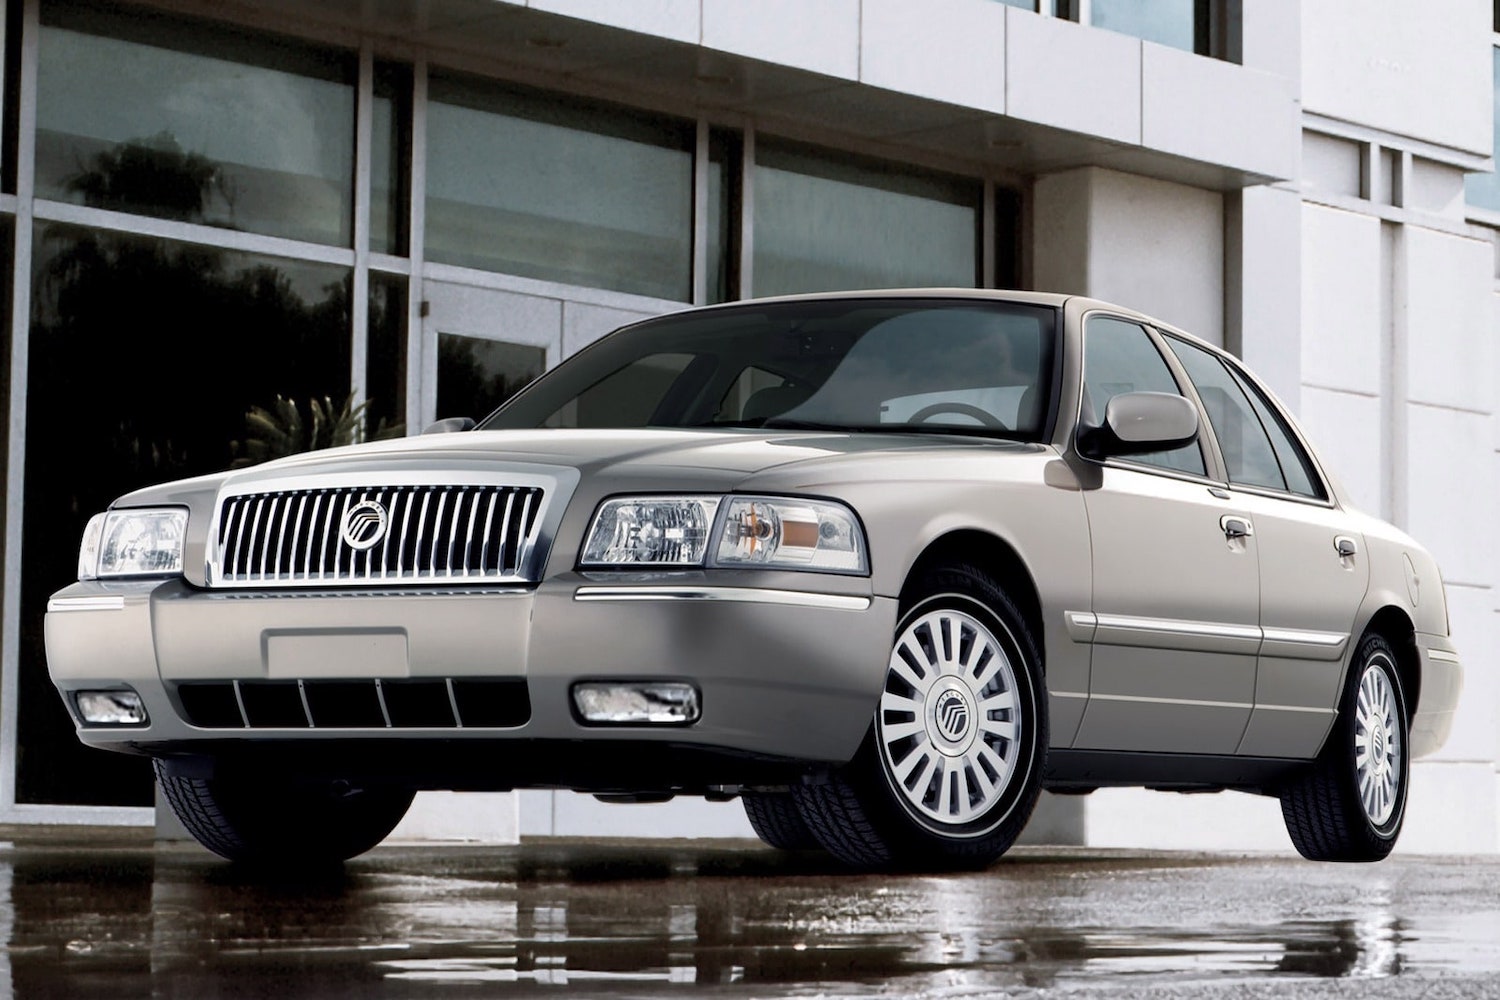 Promo photo of a gray 2007 Mercury Grand Marquis which is a reliable used luxury sedan car that you can buy for under $10k, a building visible in the background.